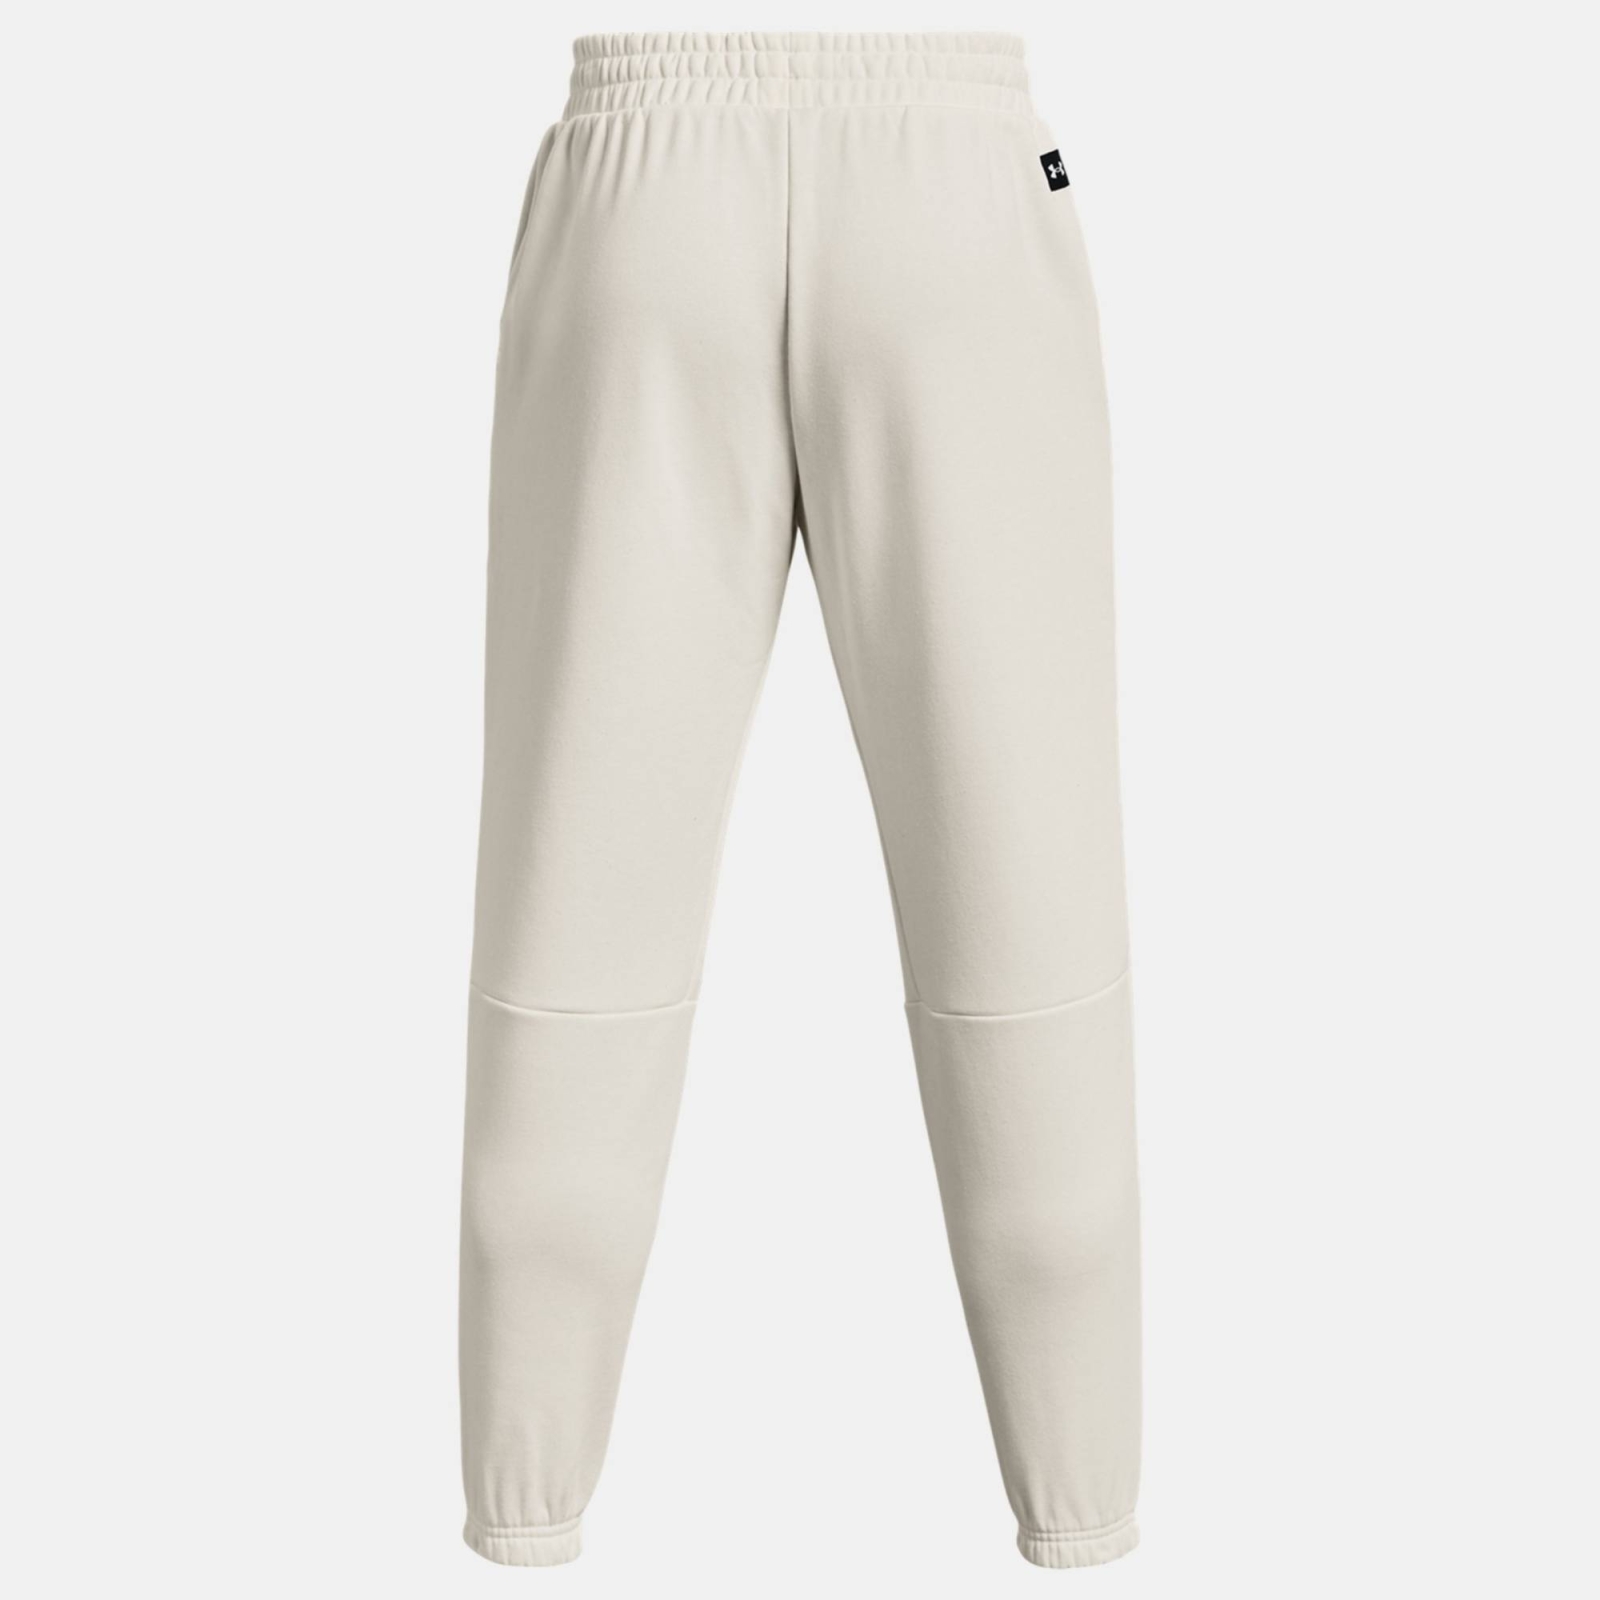 UNDER ARMOUR MENS PROJECT ROCK TERRY PANT